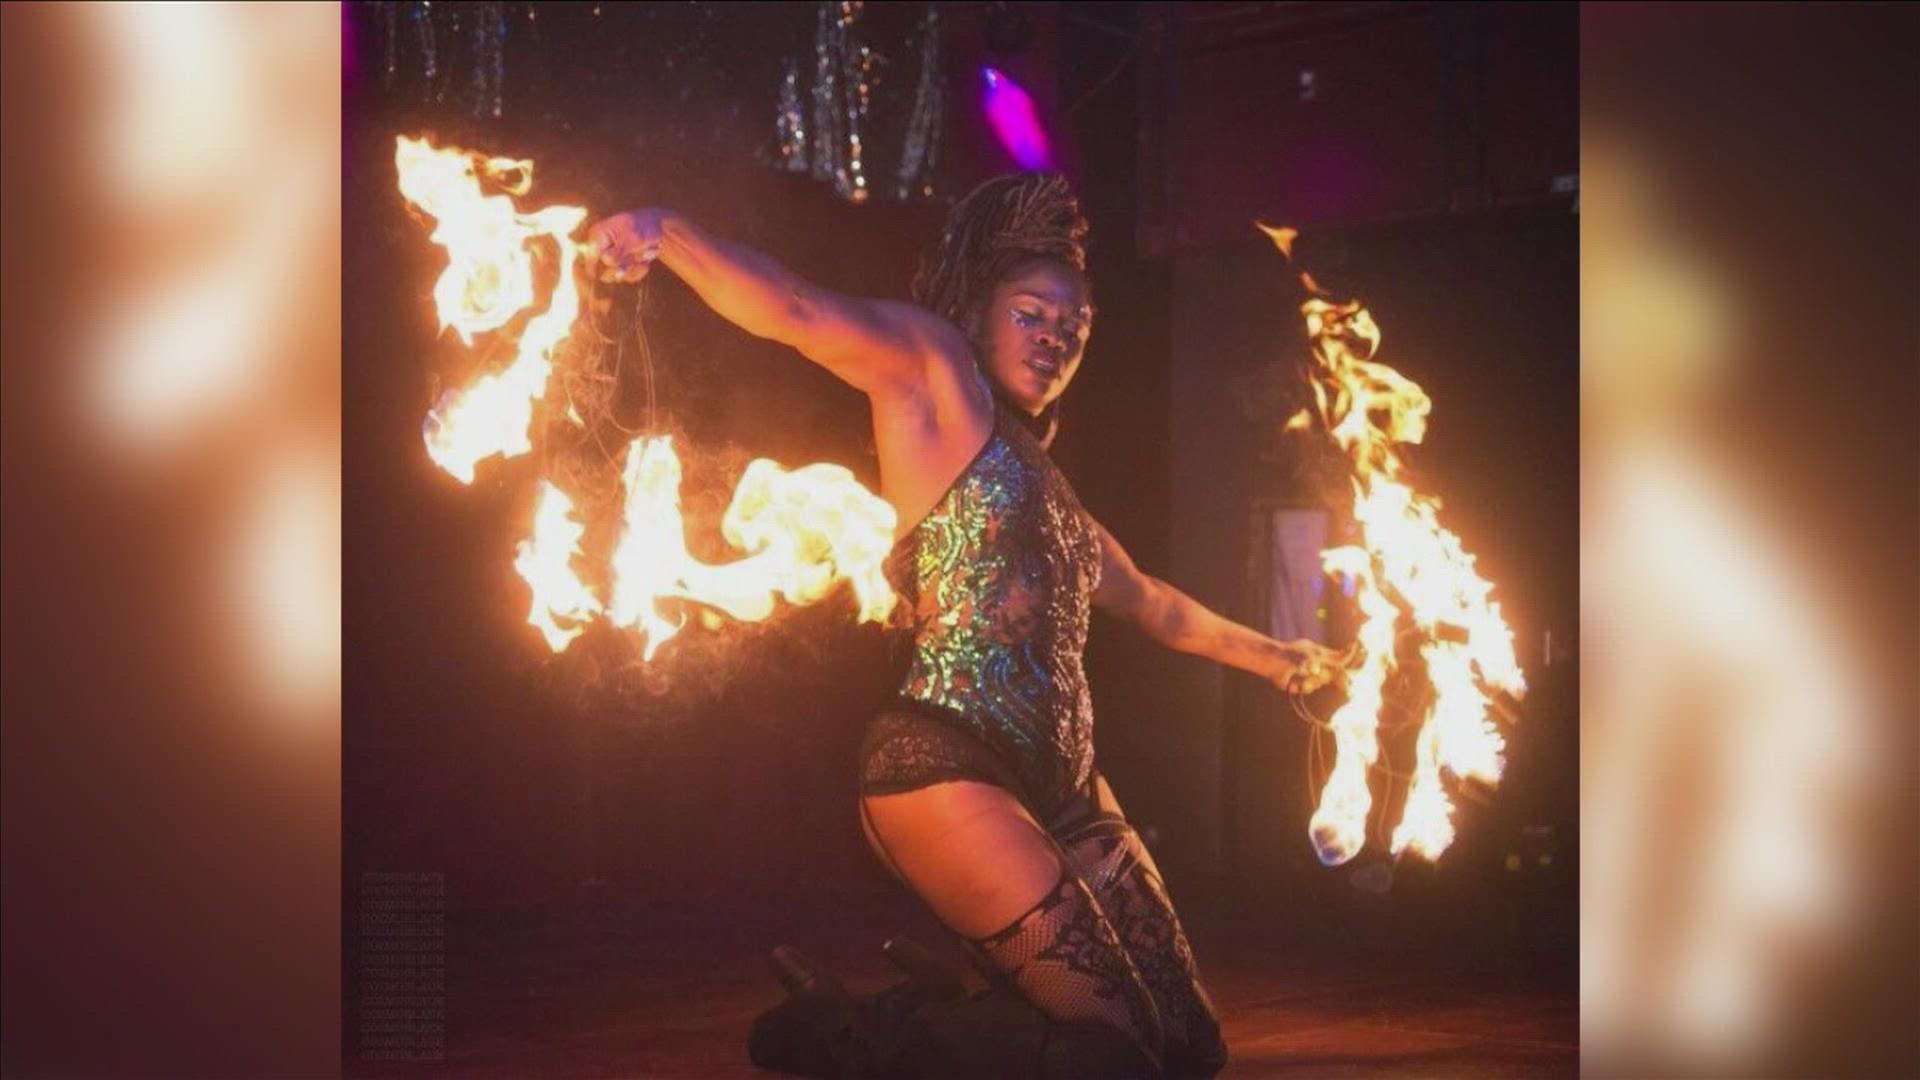 After being honorably discharged from the U.S. Airforce, Aieshia Dickey used blue flame fire performing to heal from PTSD.